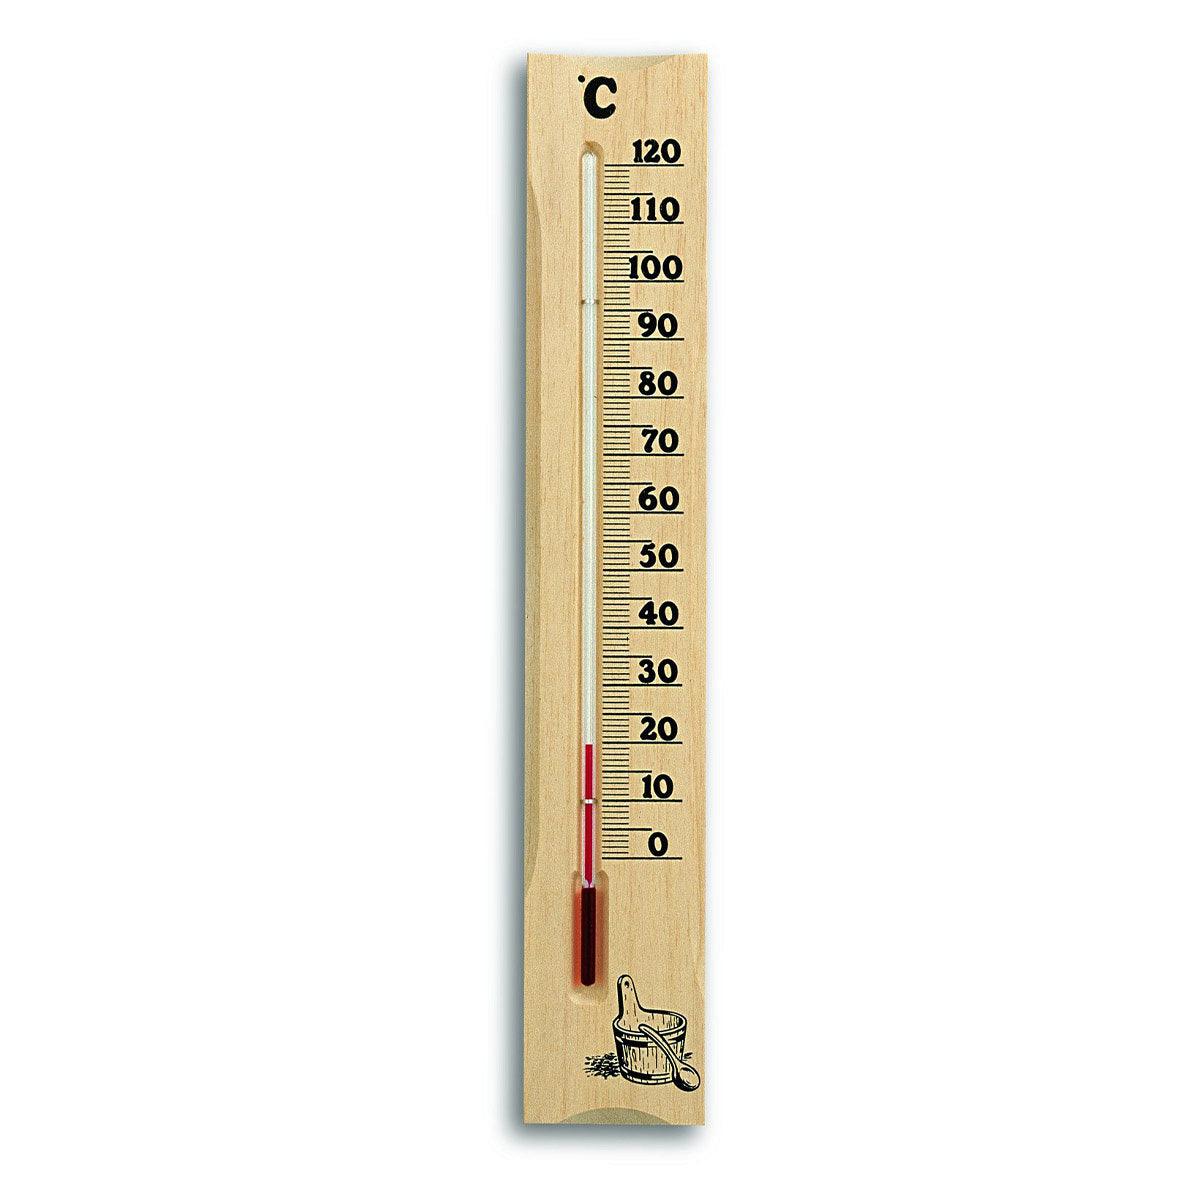 Analogue indoor thermometer made of solid wood